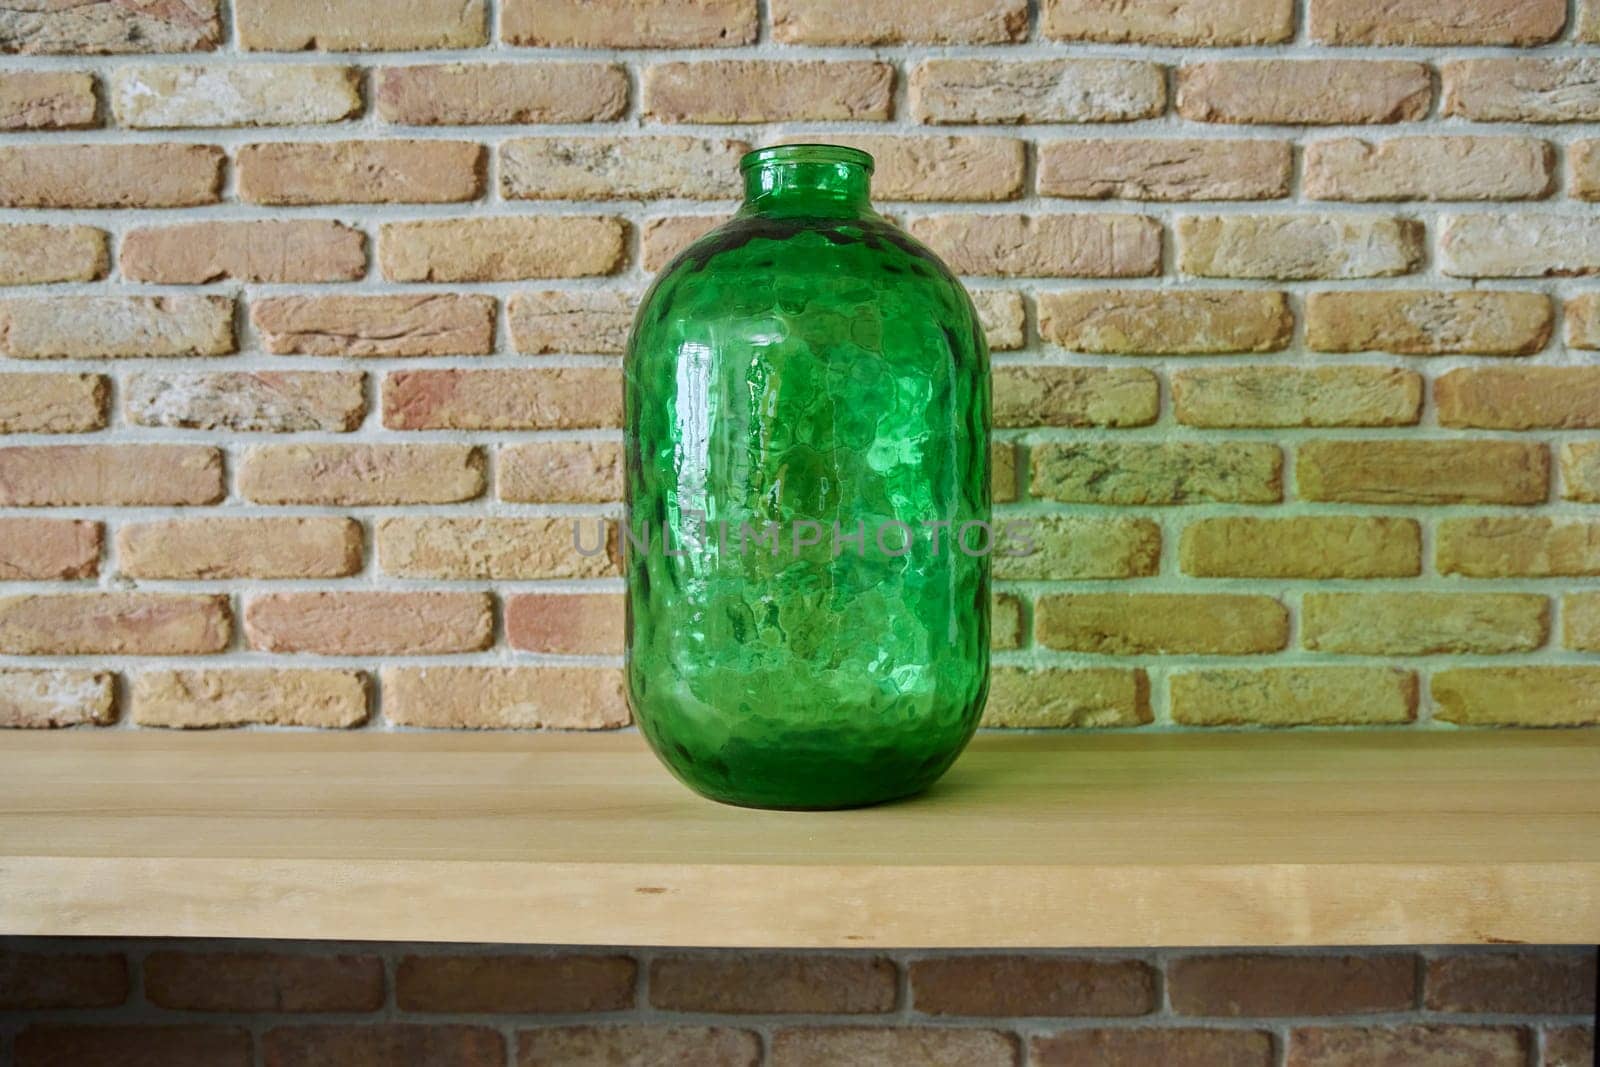 Green glass interior vase bottle on wooden desk, brick wall background. Background, copy space, design, style, interior, decor, house concept